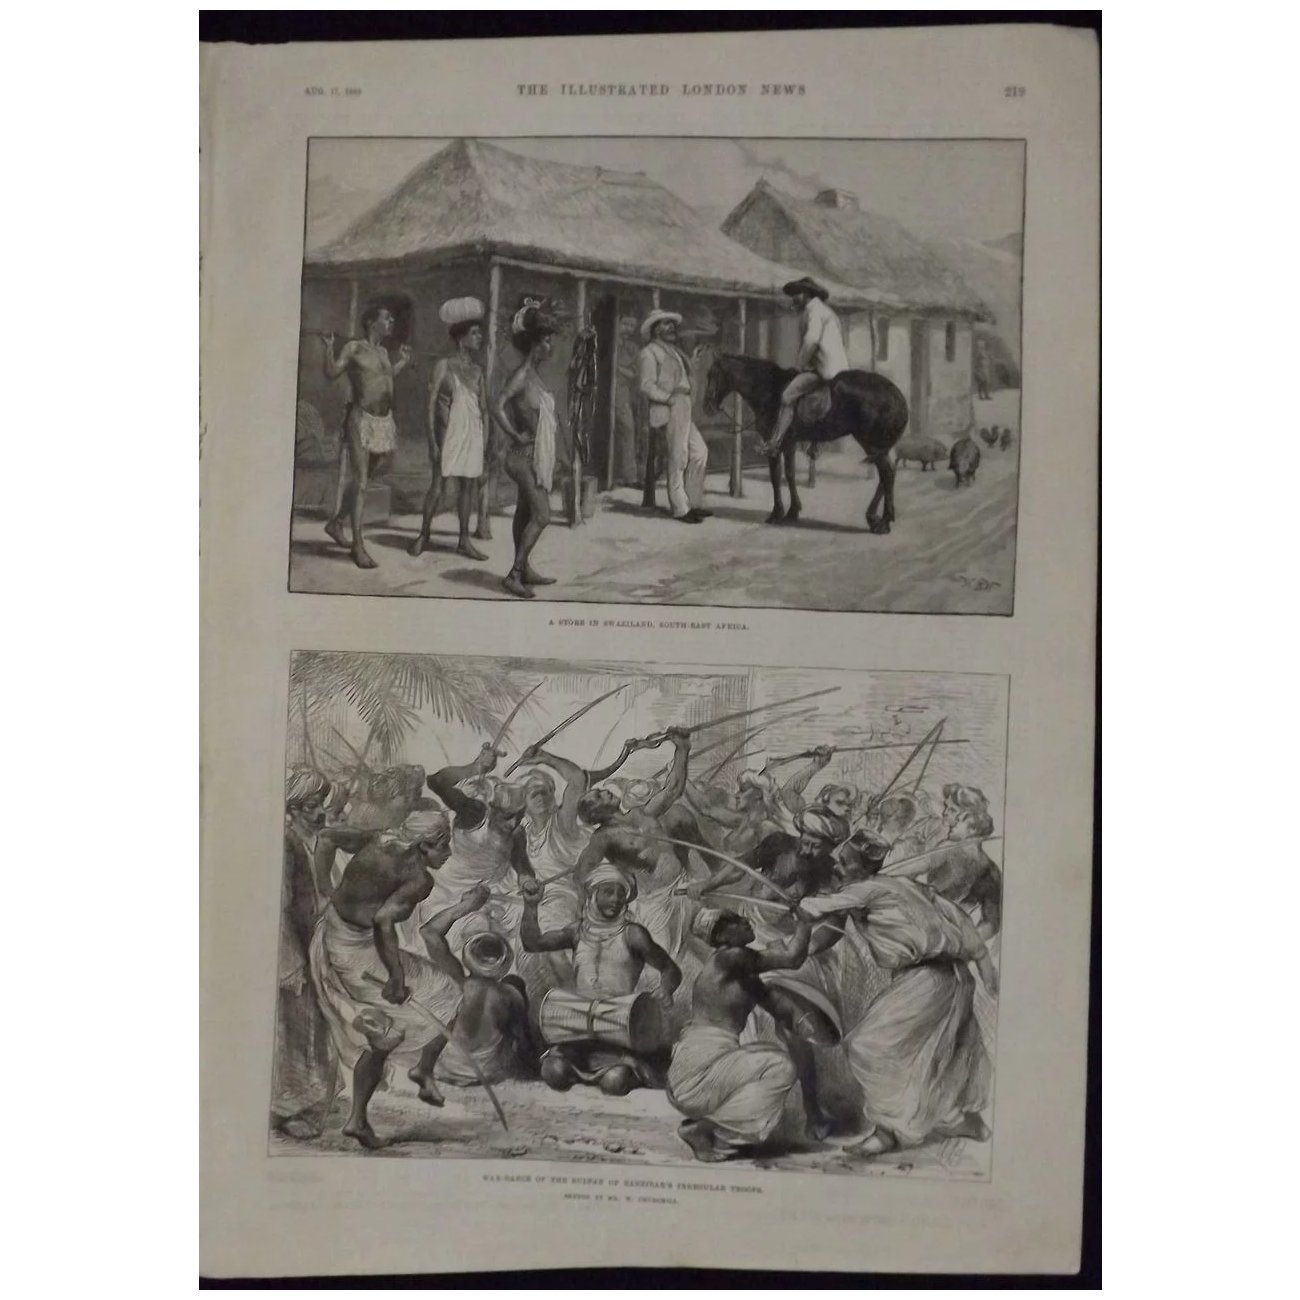 A Store In Swaziland - Illustrated London News 1889